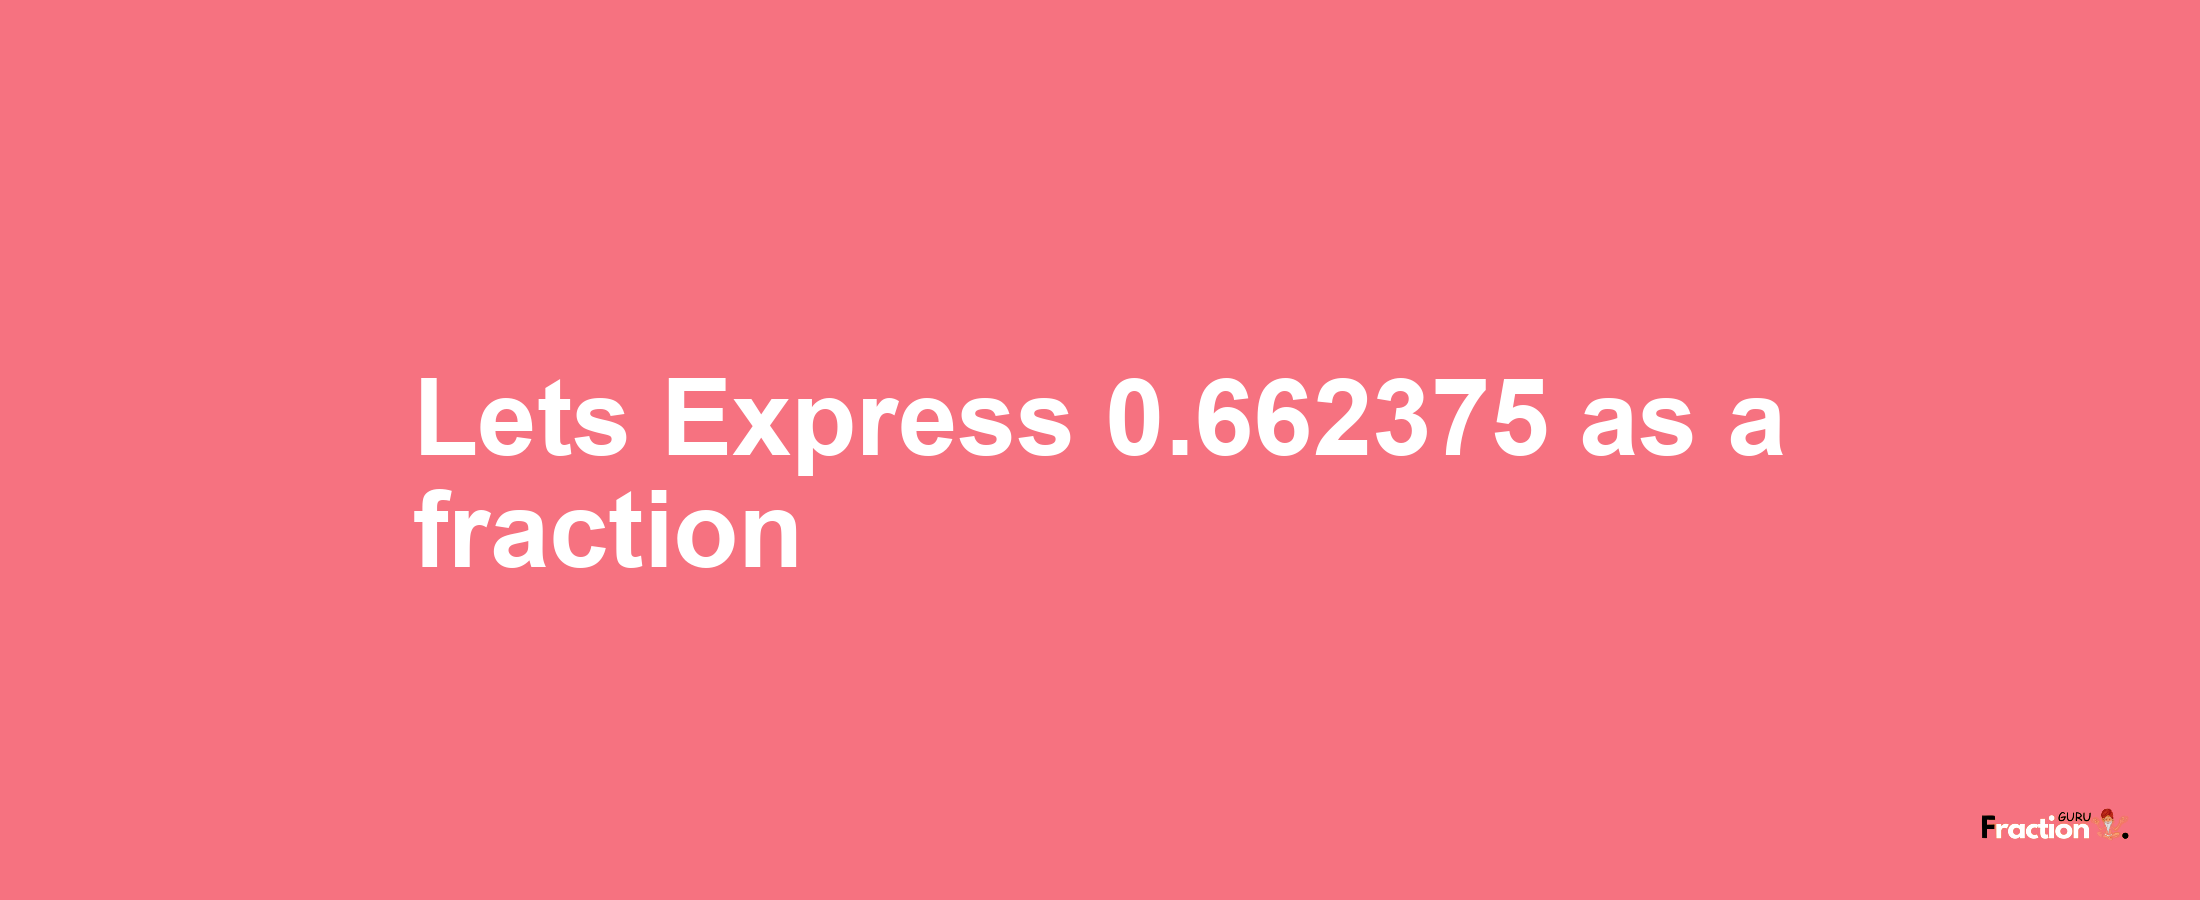 Lets Express 0.662375 as afraction